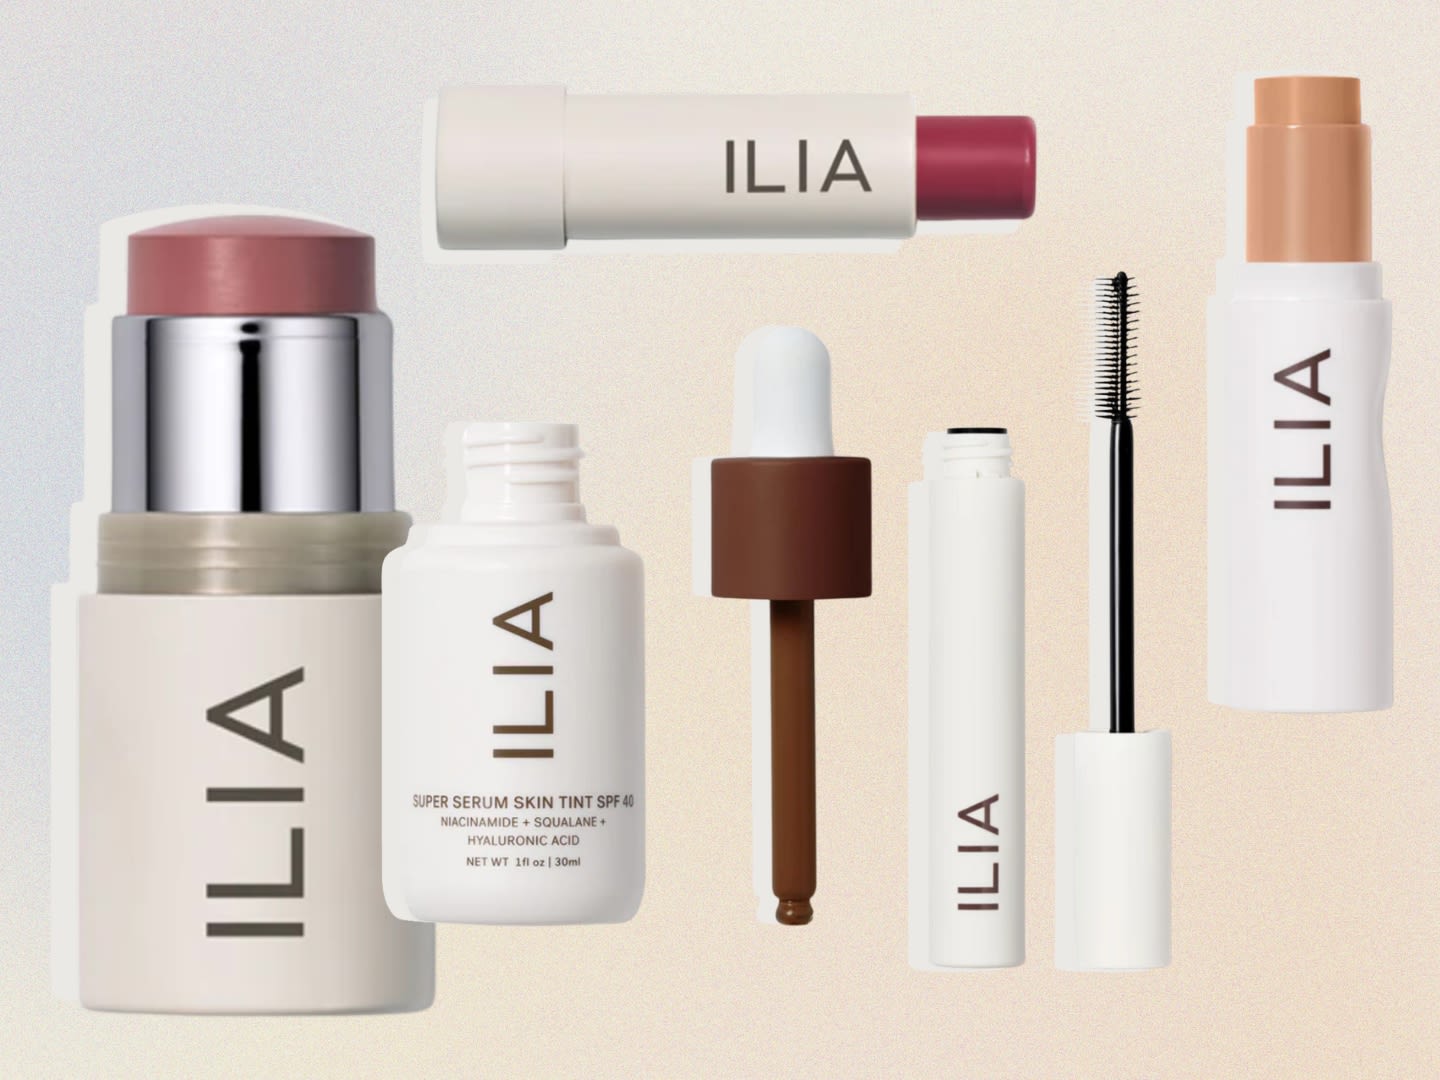 Hollywood’s Favorite Tinted Serum & Other Editor-Approved Picks You’ll Want to Snag at ILIA's Friends & Family Sale